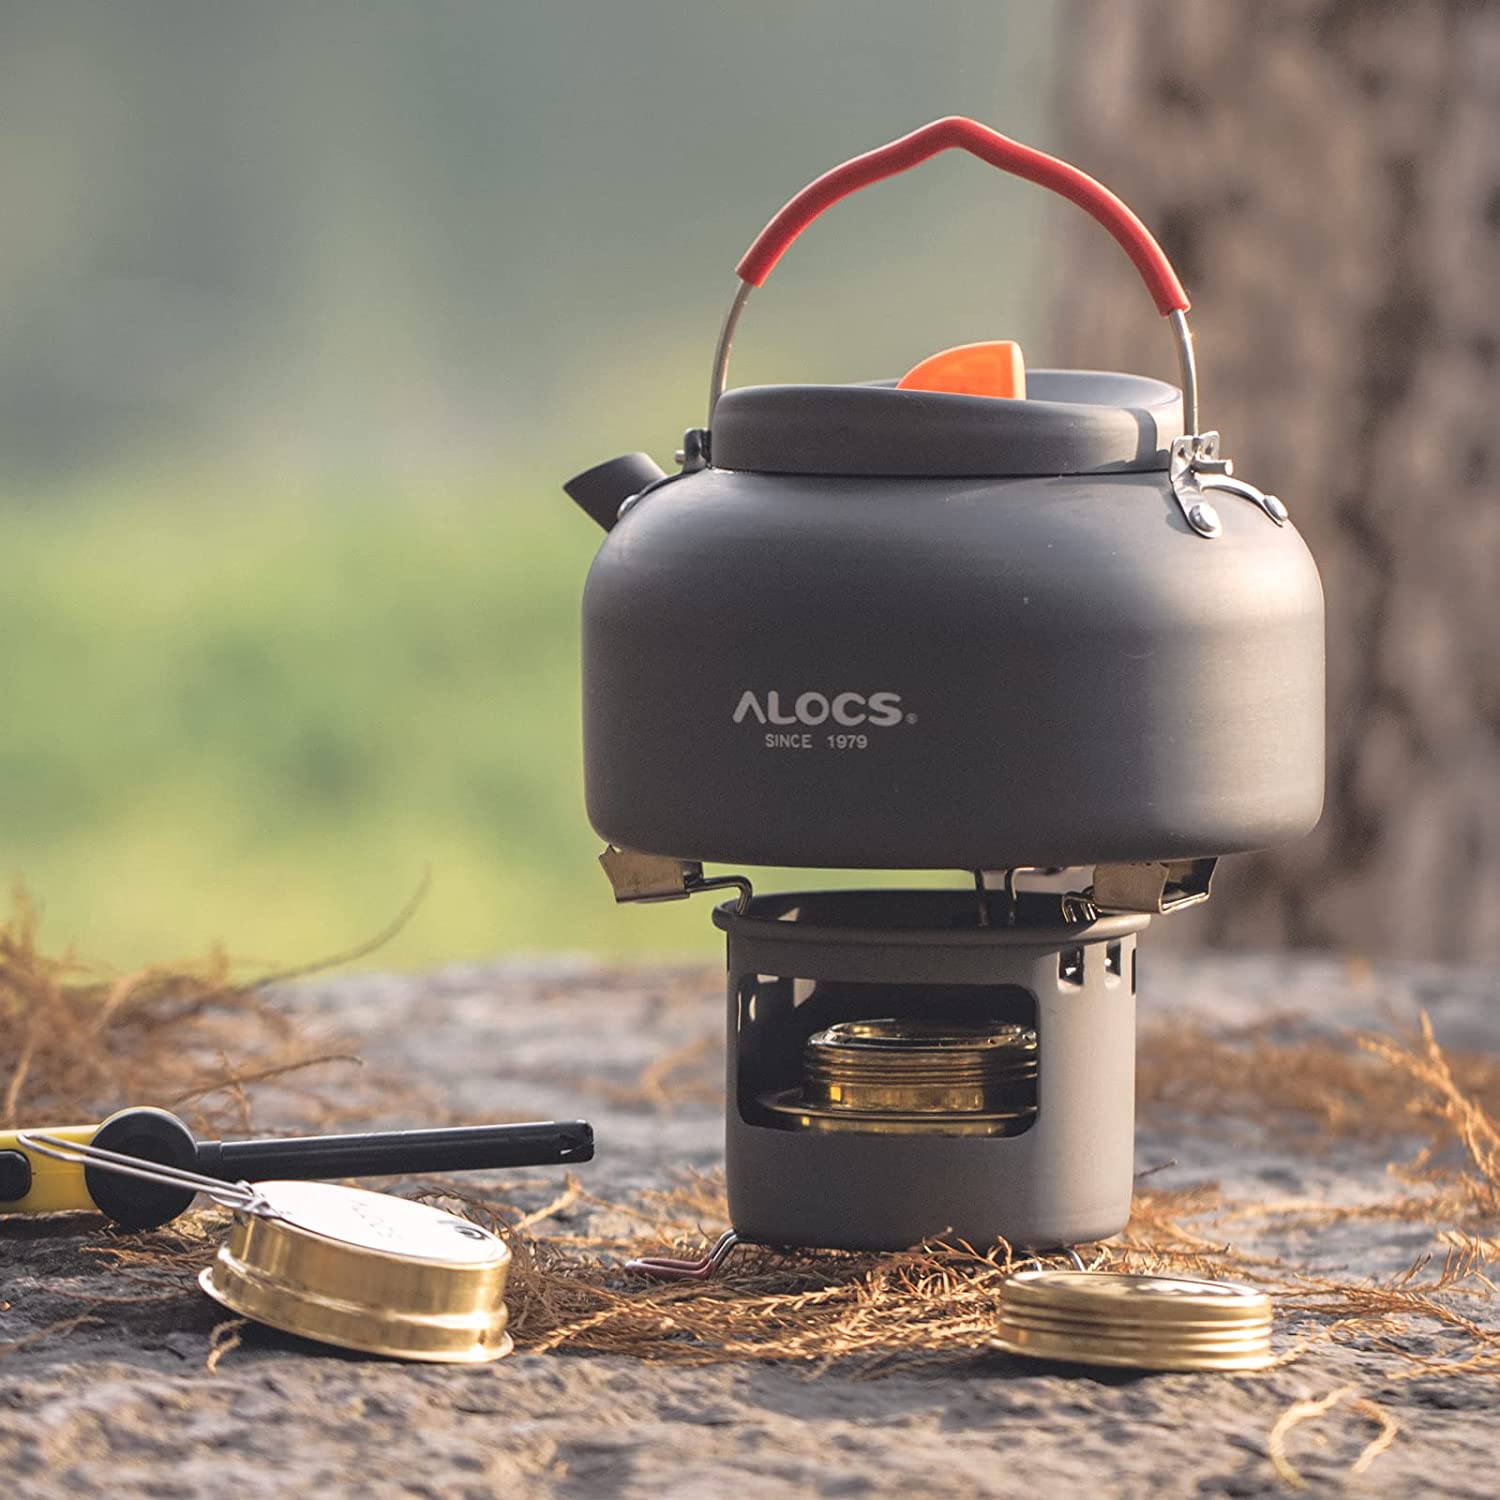 ALOCS Portable Alcohol Stove for Backpacking Hiking Camping